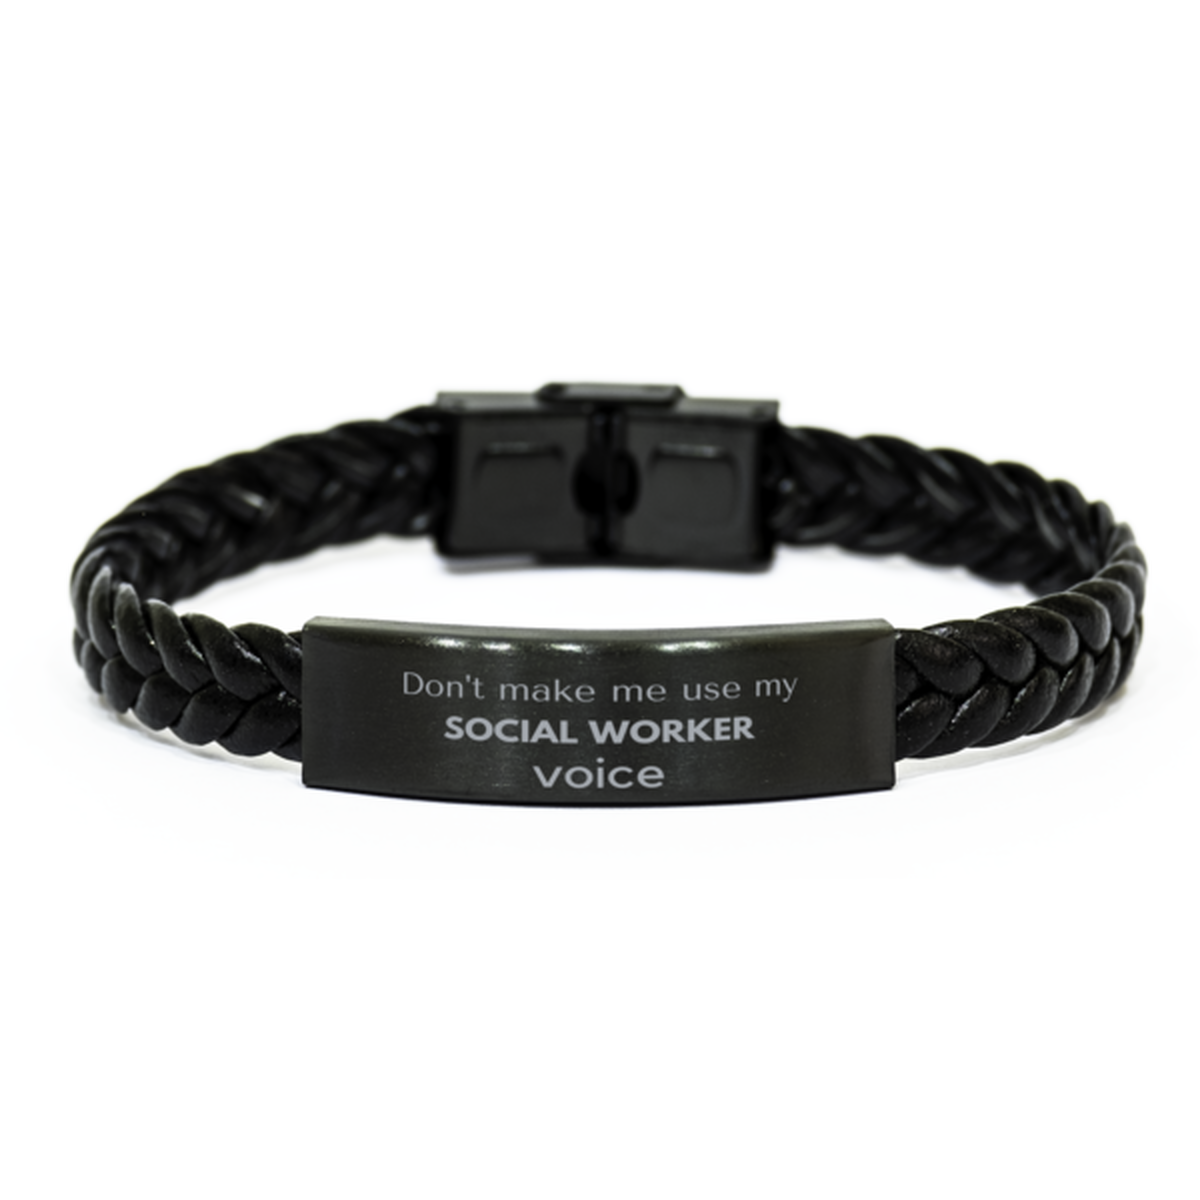 Don't make me use my Social Worker voice, Sarcasm Social Worker Gifts, Christmas Social Worker Braided Leather Bracelet Birthday Unique Gifts For Social Worker Coworkers, Men, Women, Colleague, Friends